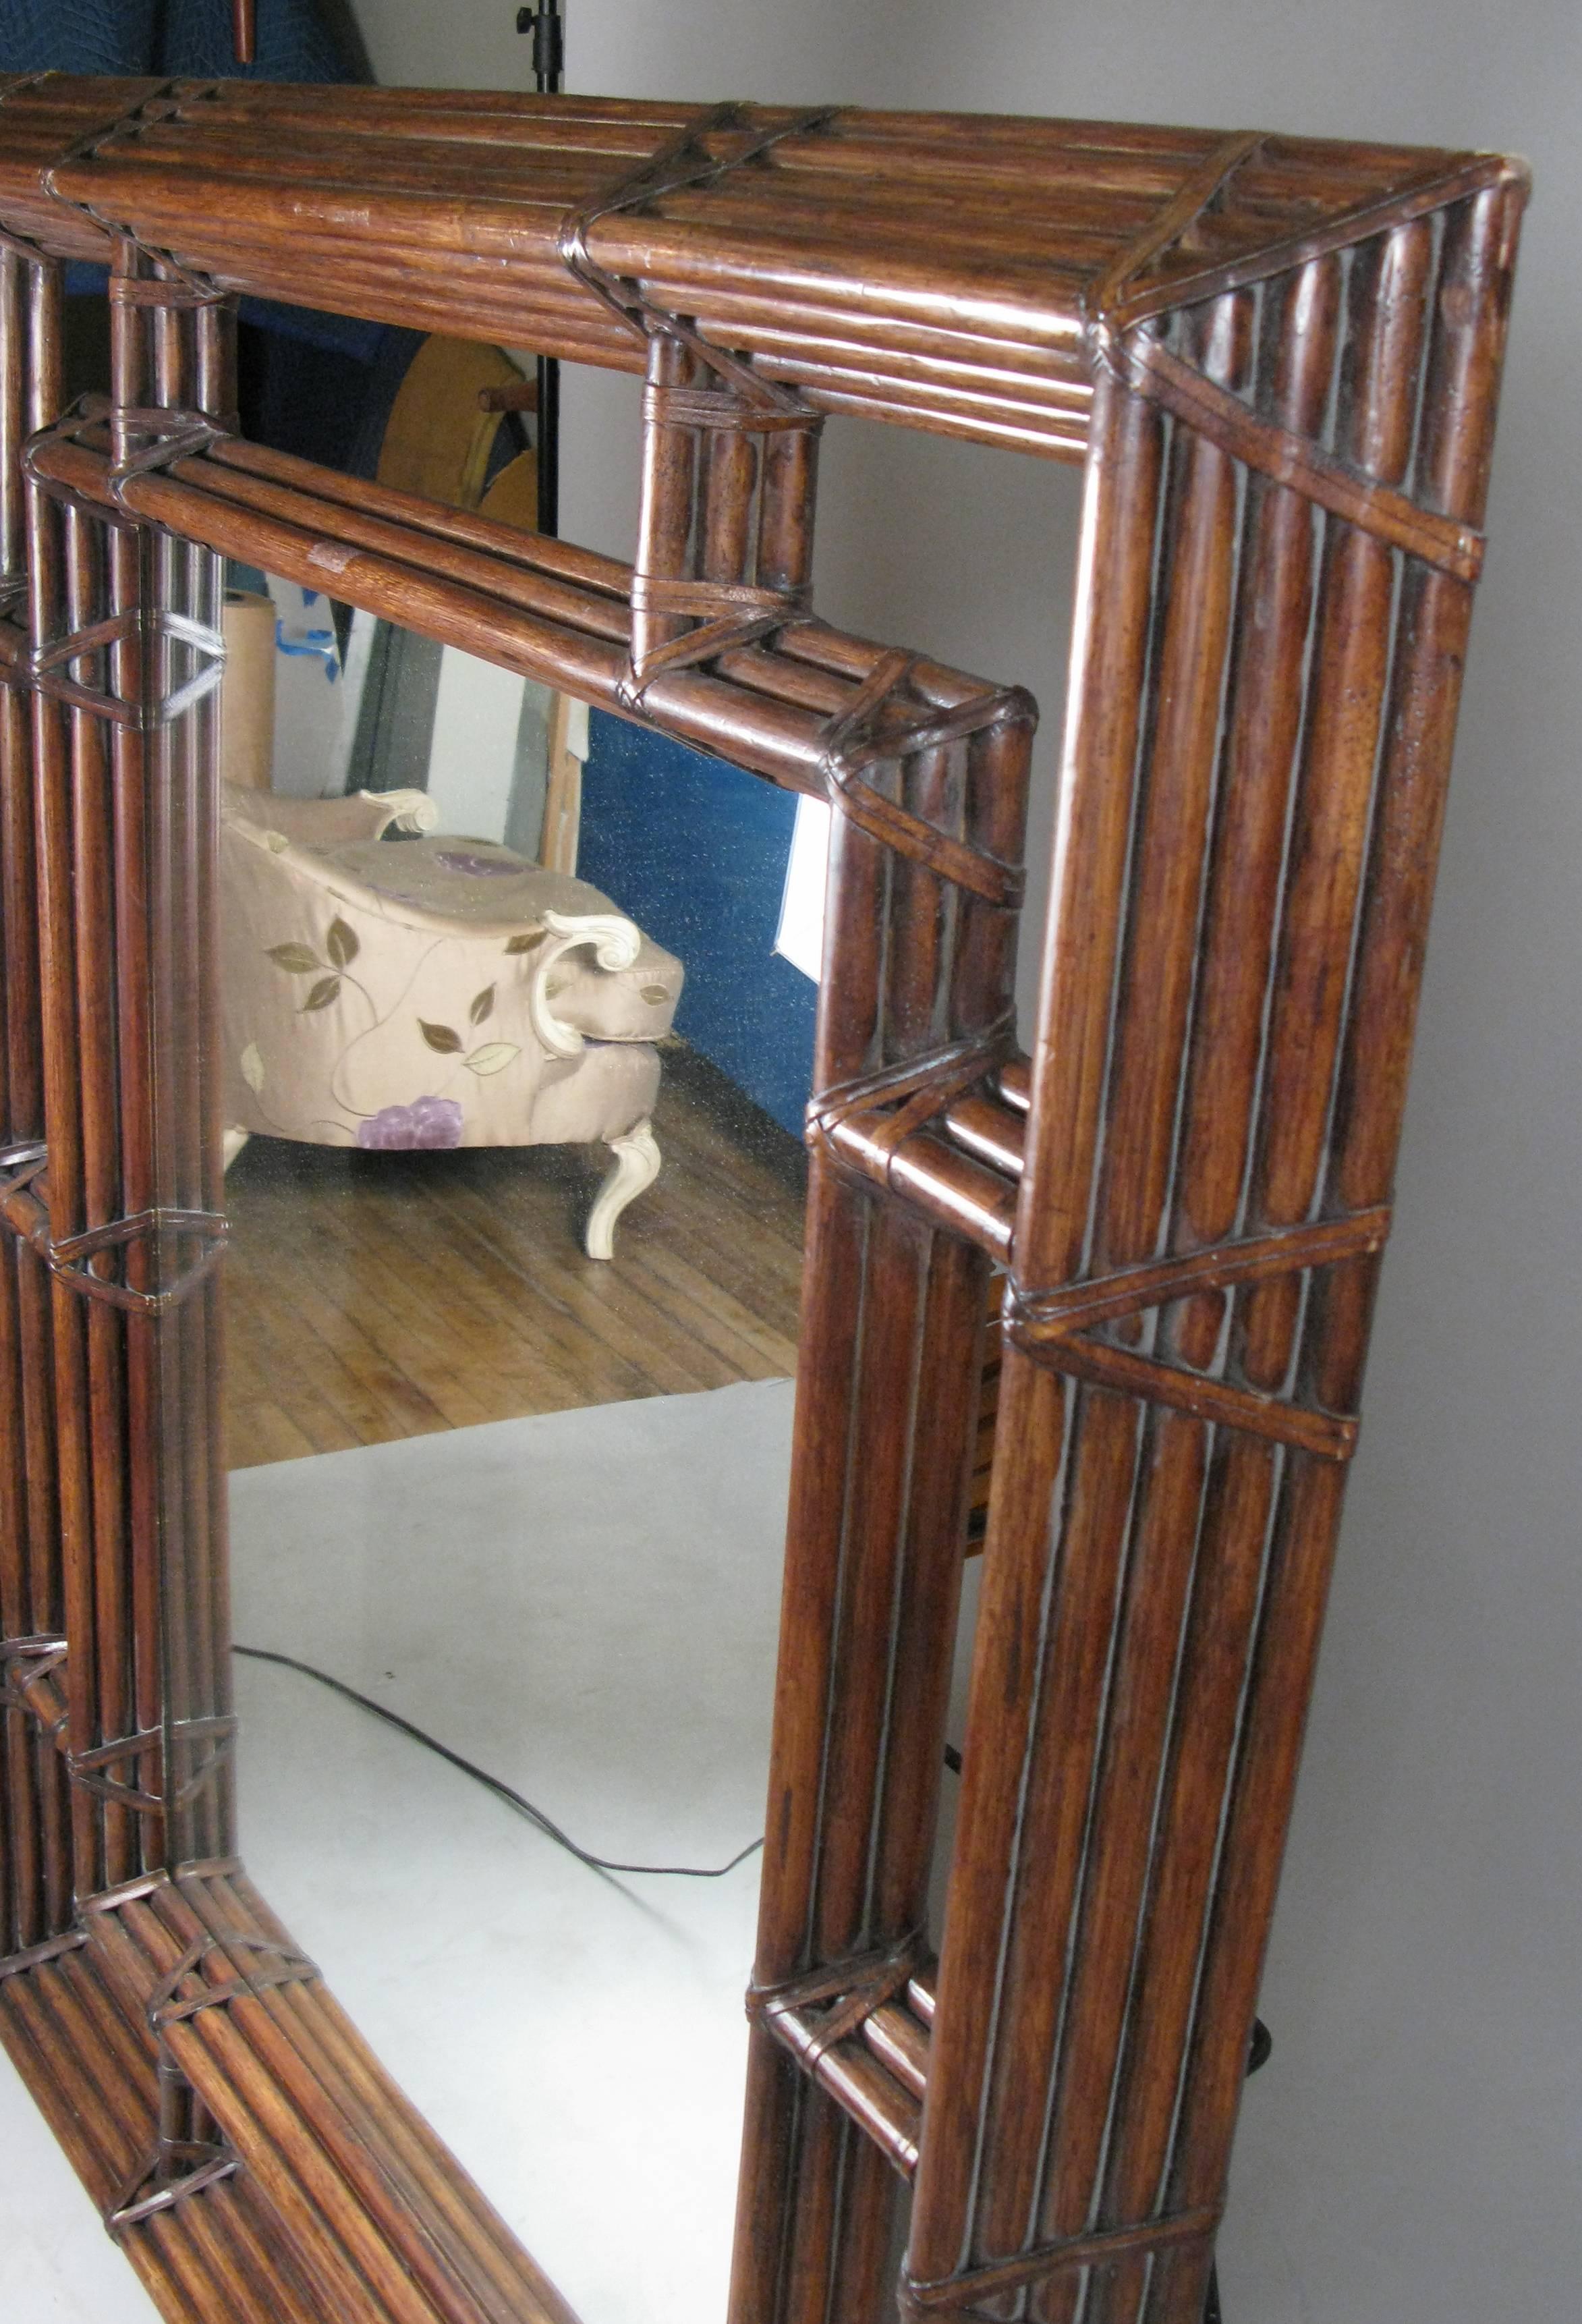 A wonderful large-scale 1970s wall mirror by McGuire, in their Classic and iconic bamboo frame with rawhide lacing. The design features an open outer framework, deeply bevelled, and inner framed mirror, creating an open space between the two frames.